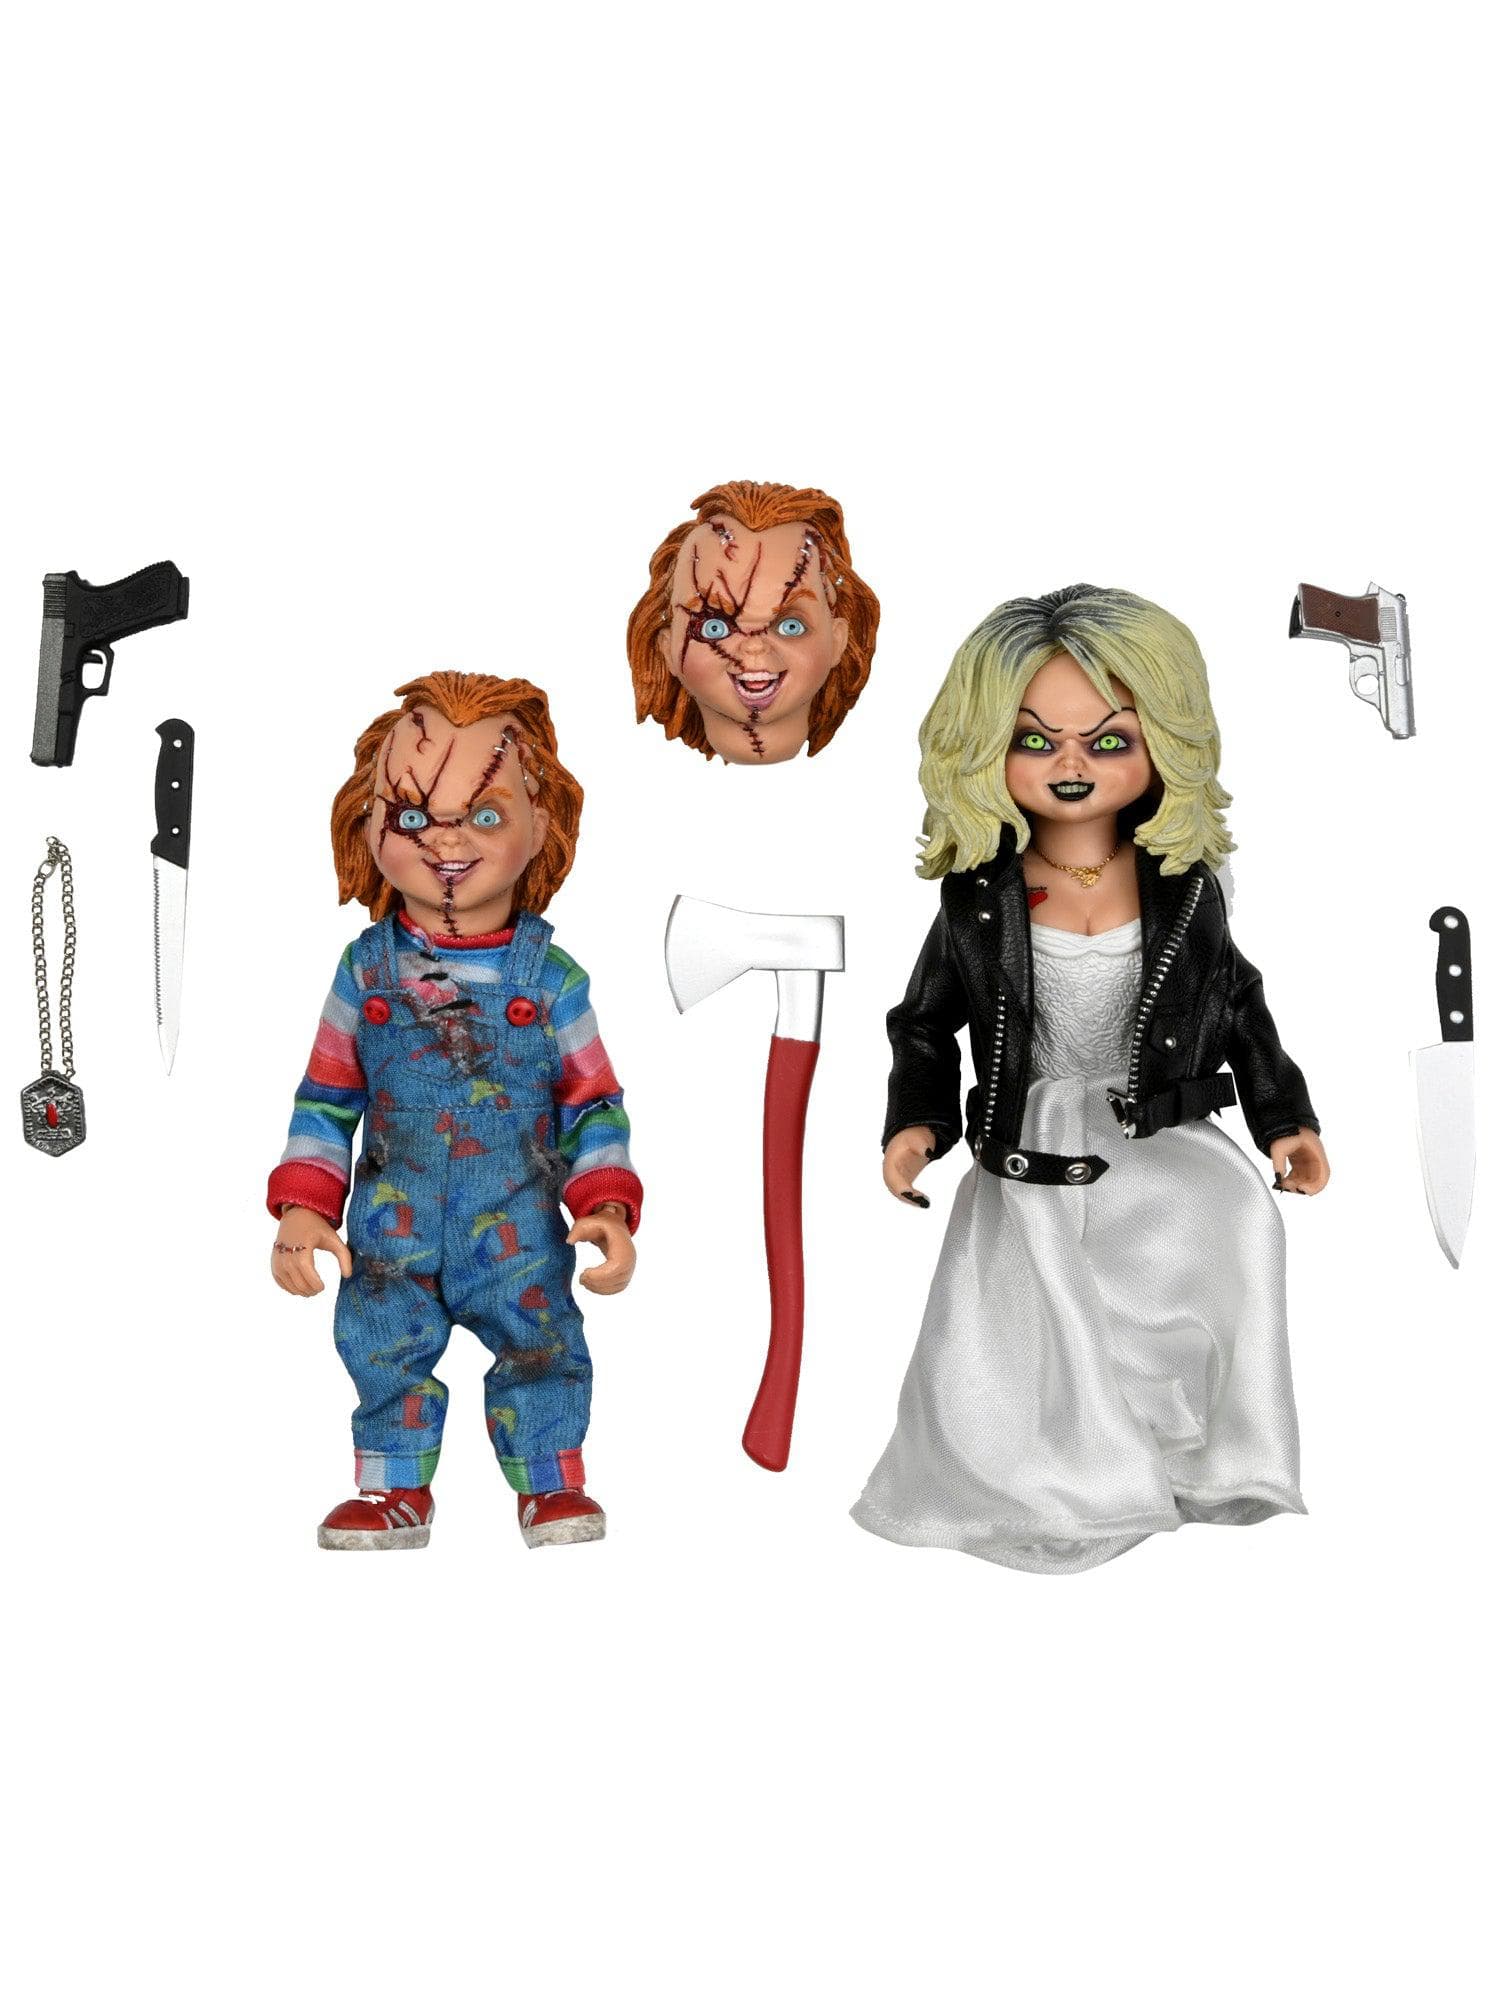 NECA - Bride of Chucky - 8" Clothed Action Figure - Chucky and Tiffany 2 Pack - costumes.com